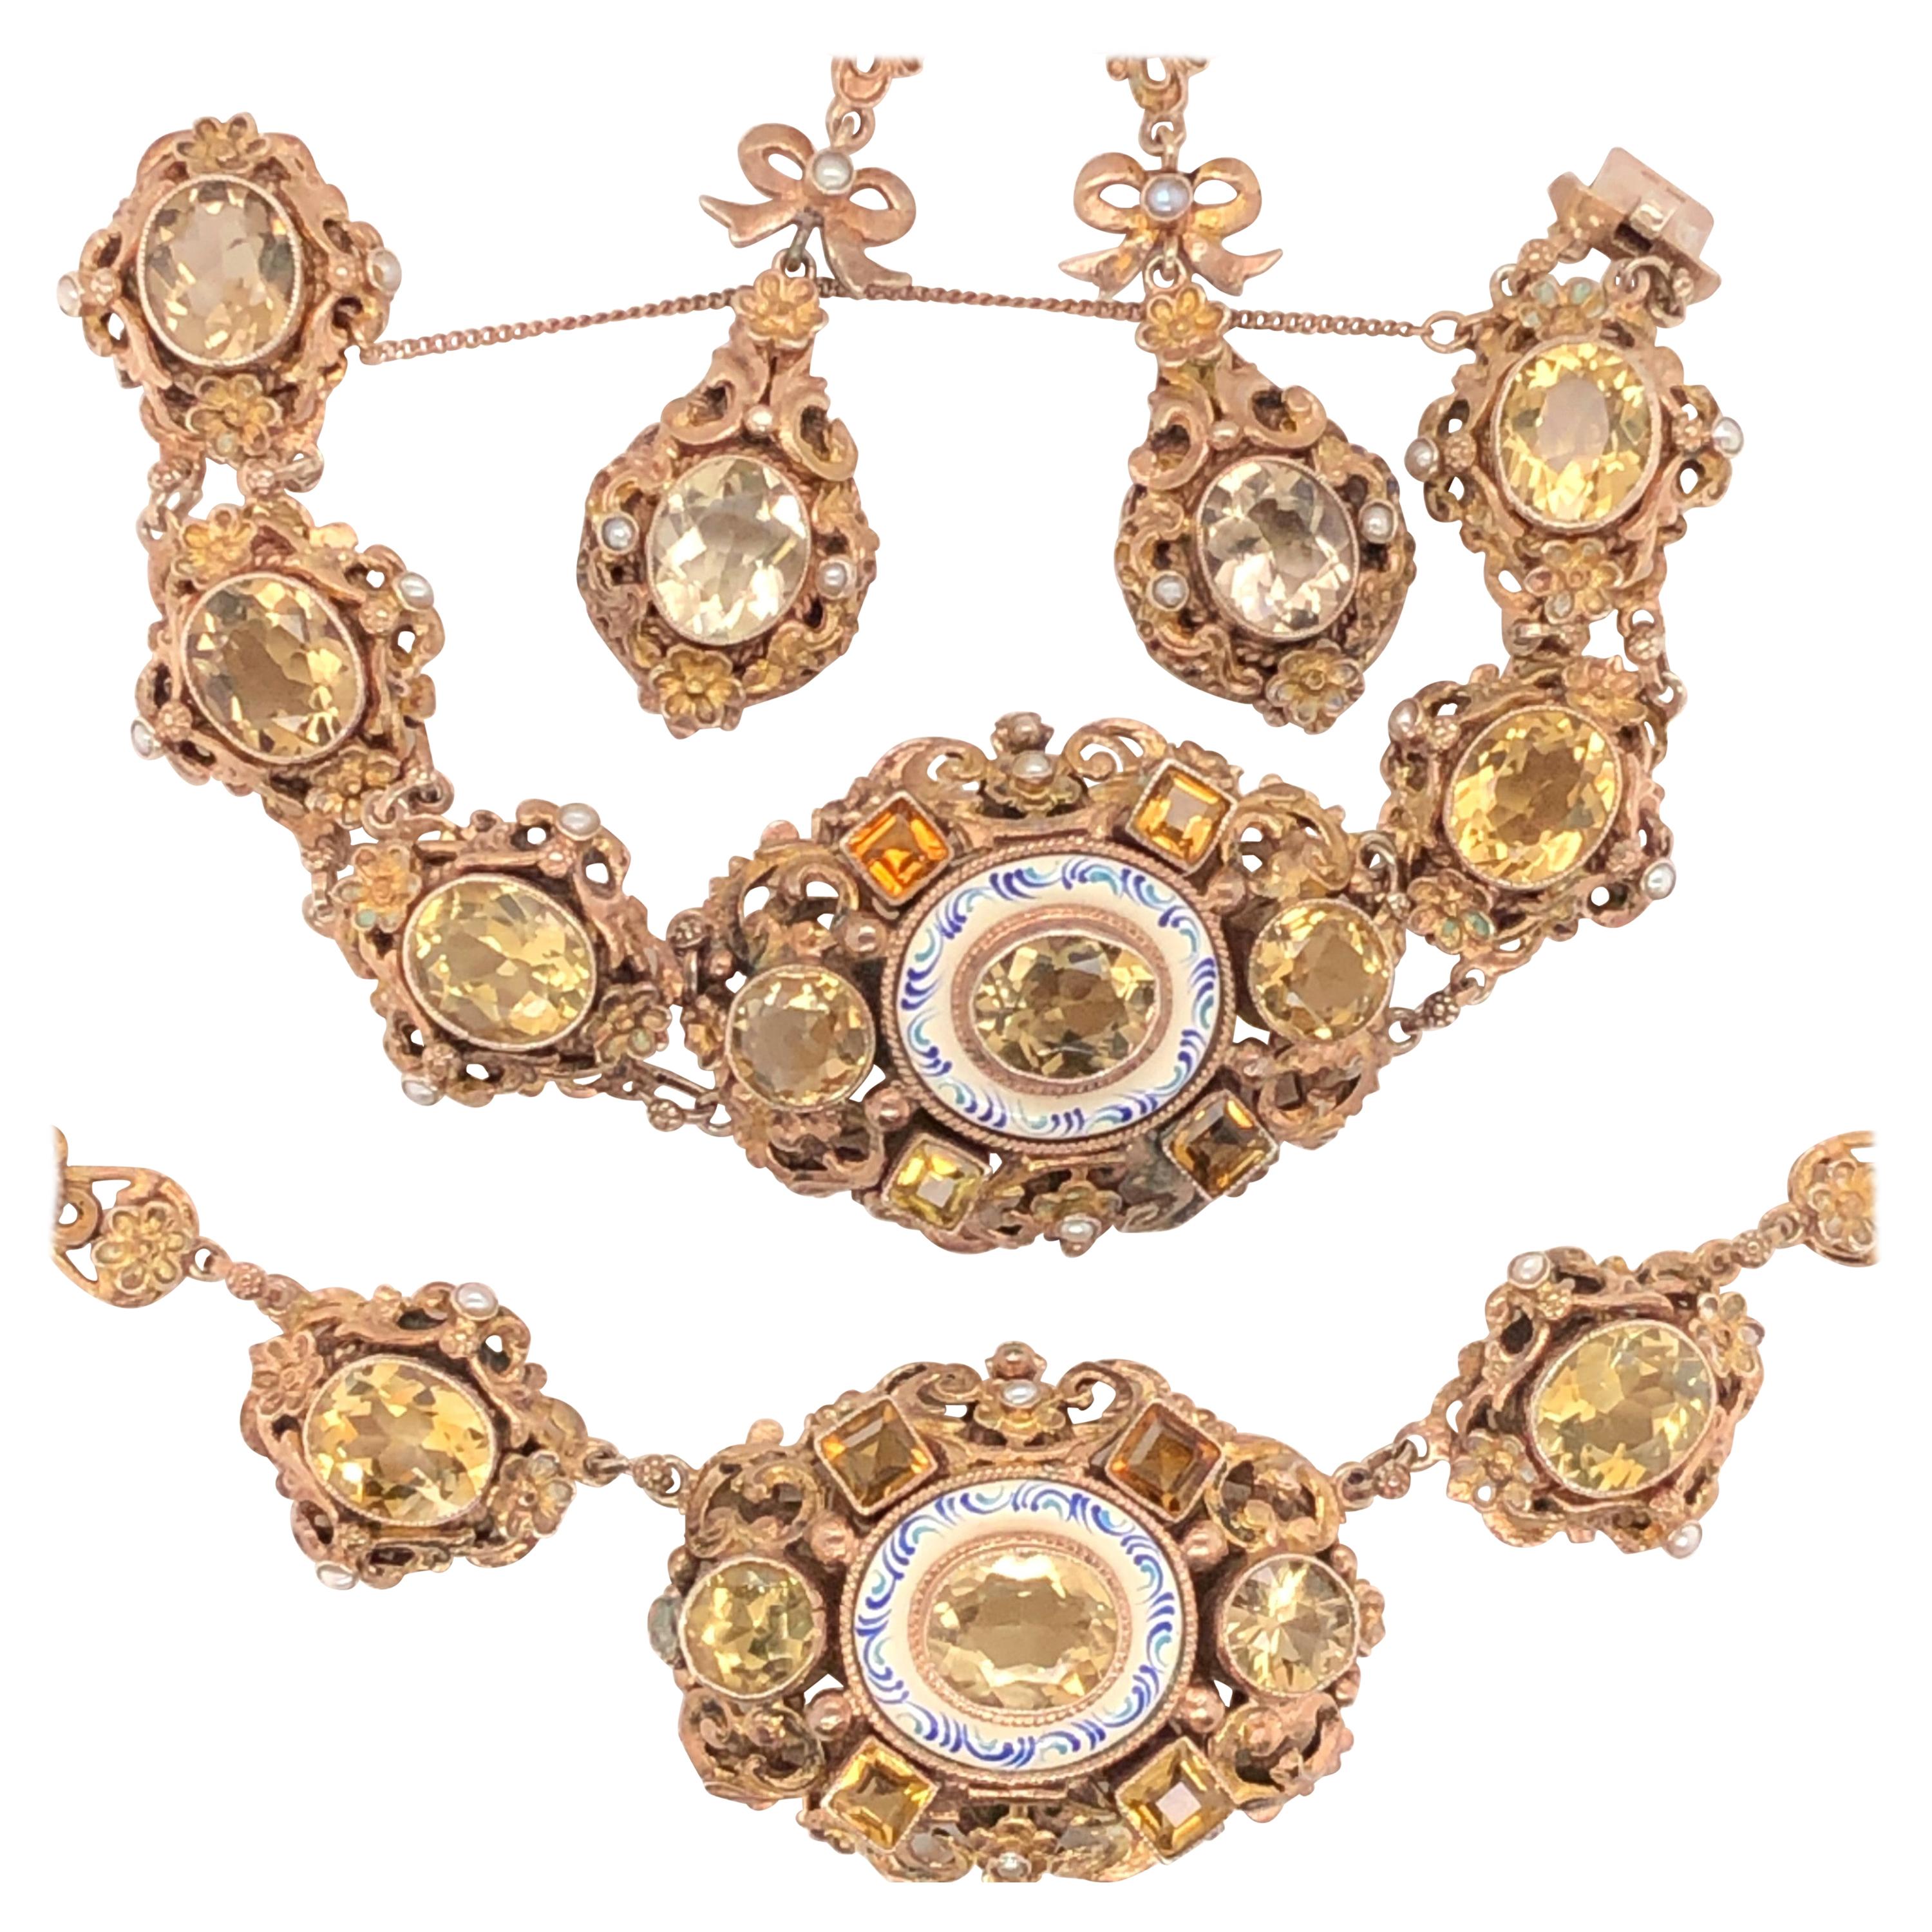 Austro-Hungarian Necklace, Bracelet and Earring Set